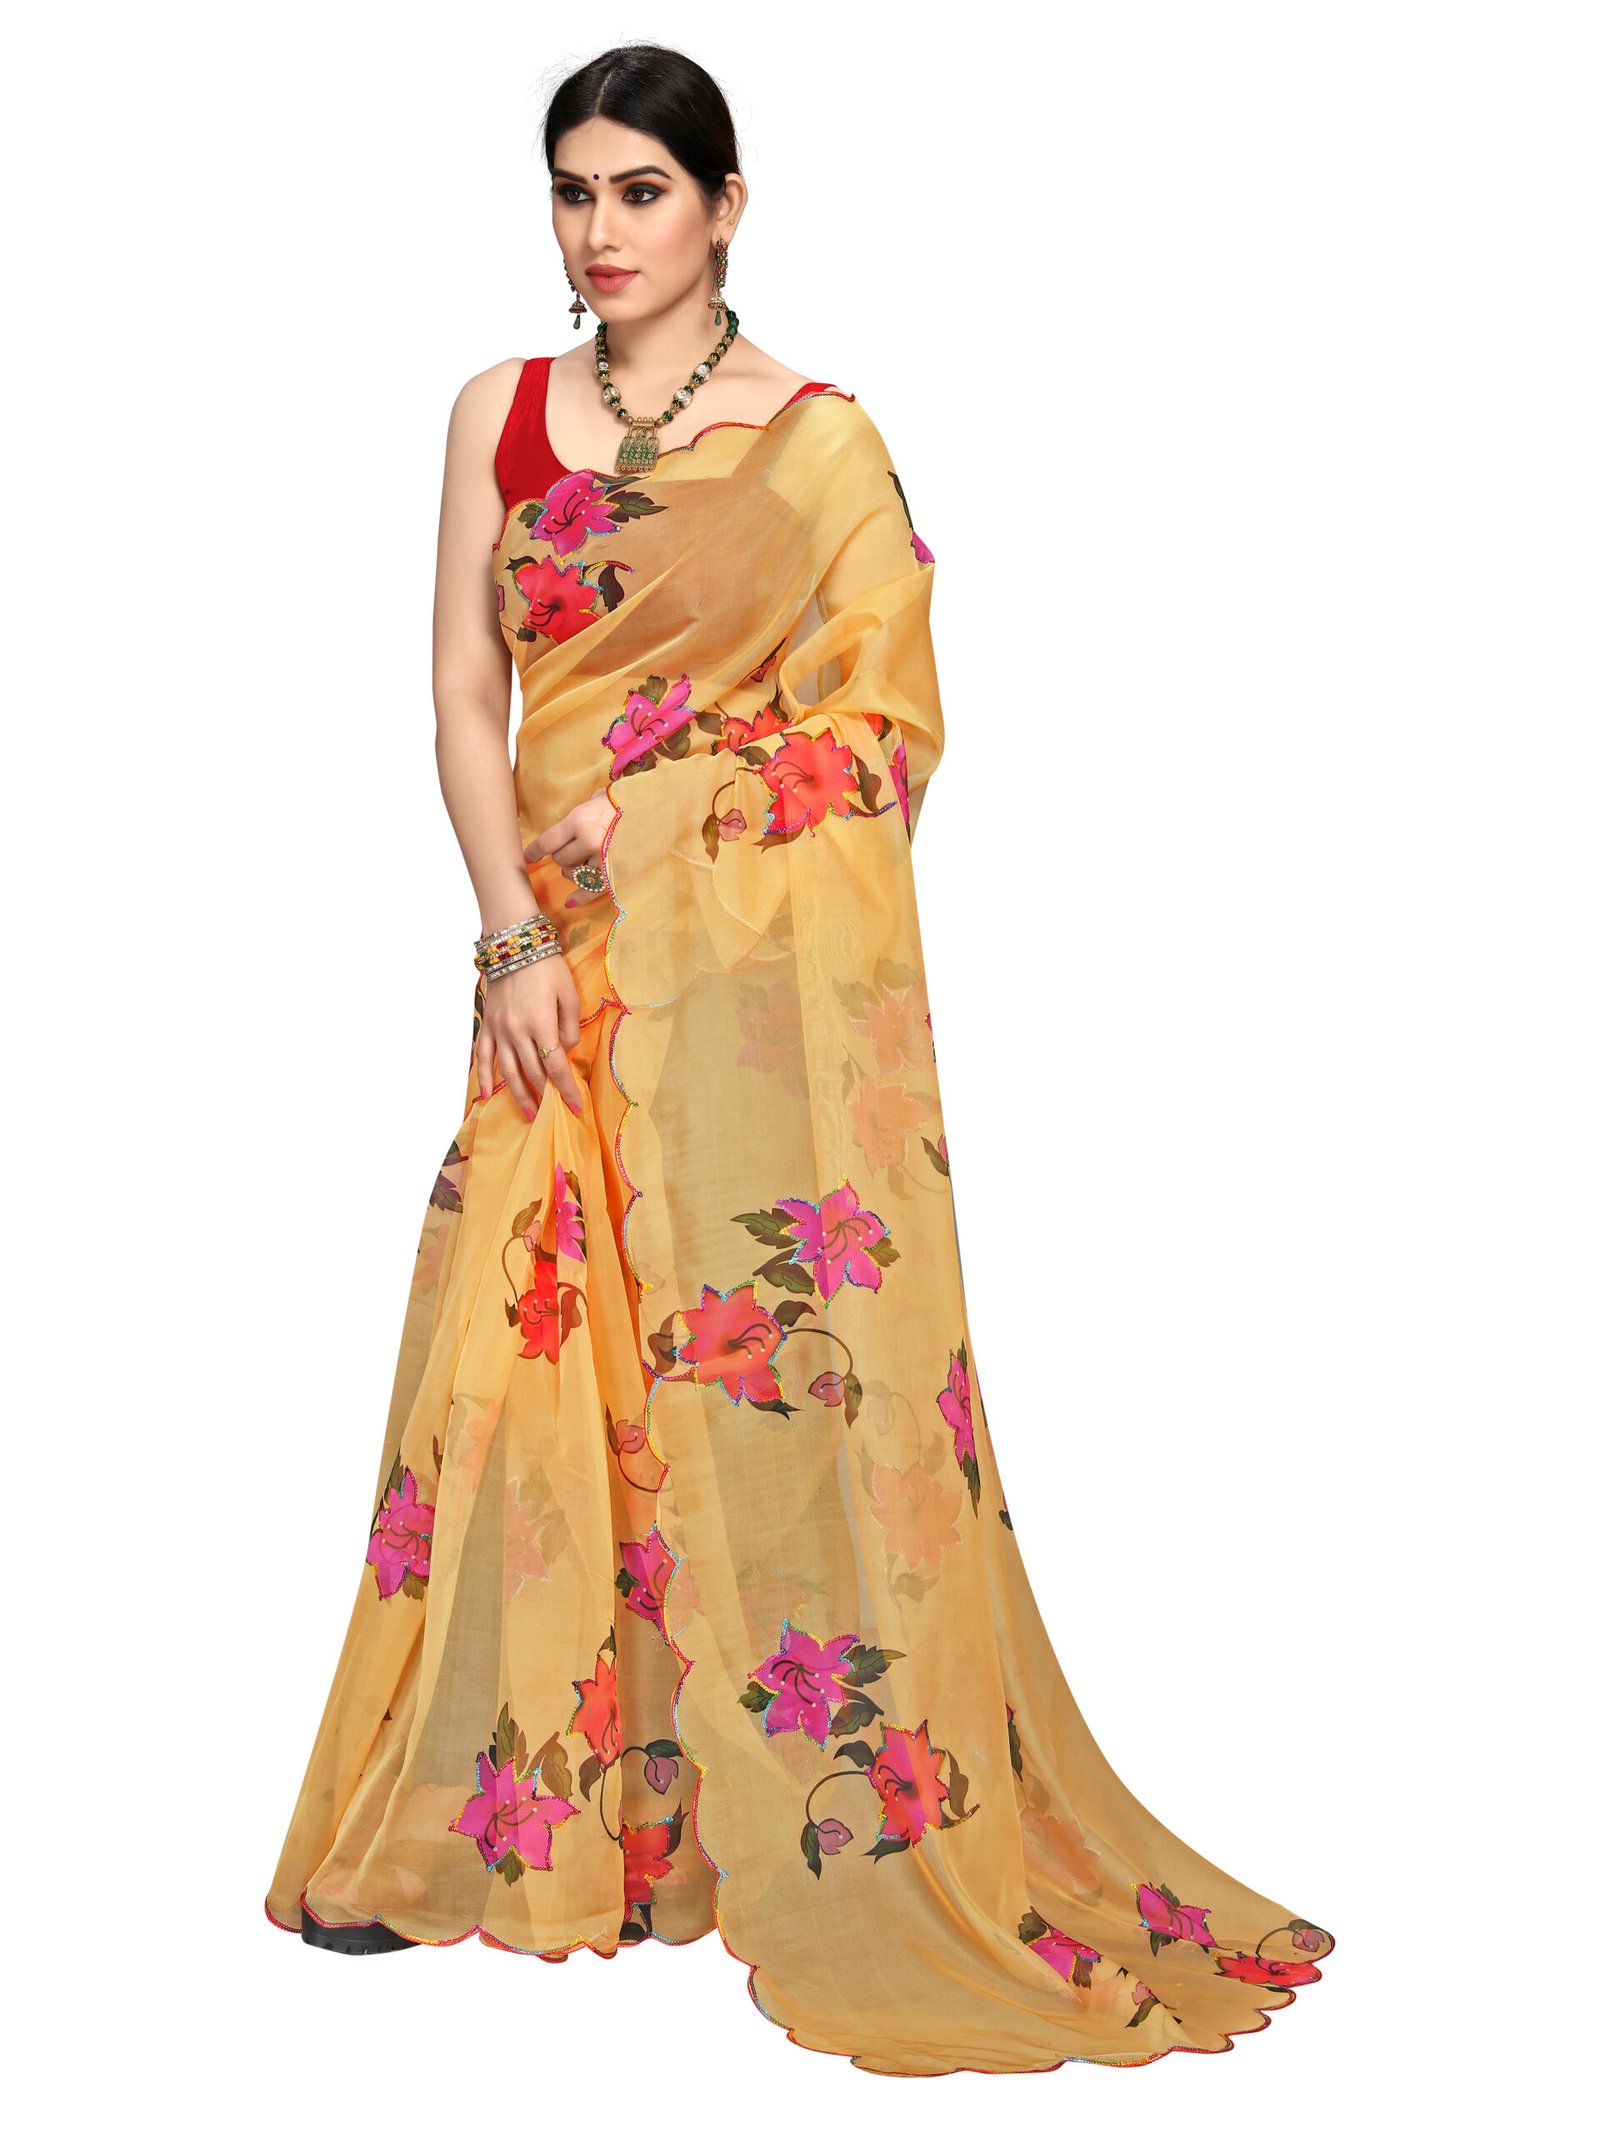 Meesho party wear saree review, Best party wear saree under 500/